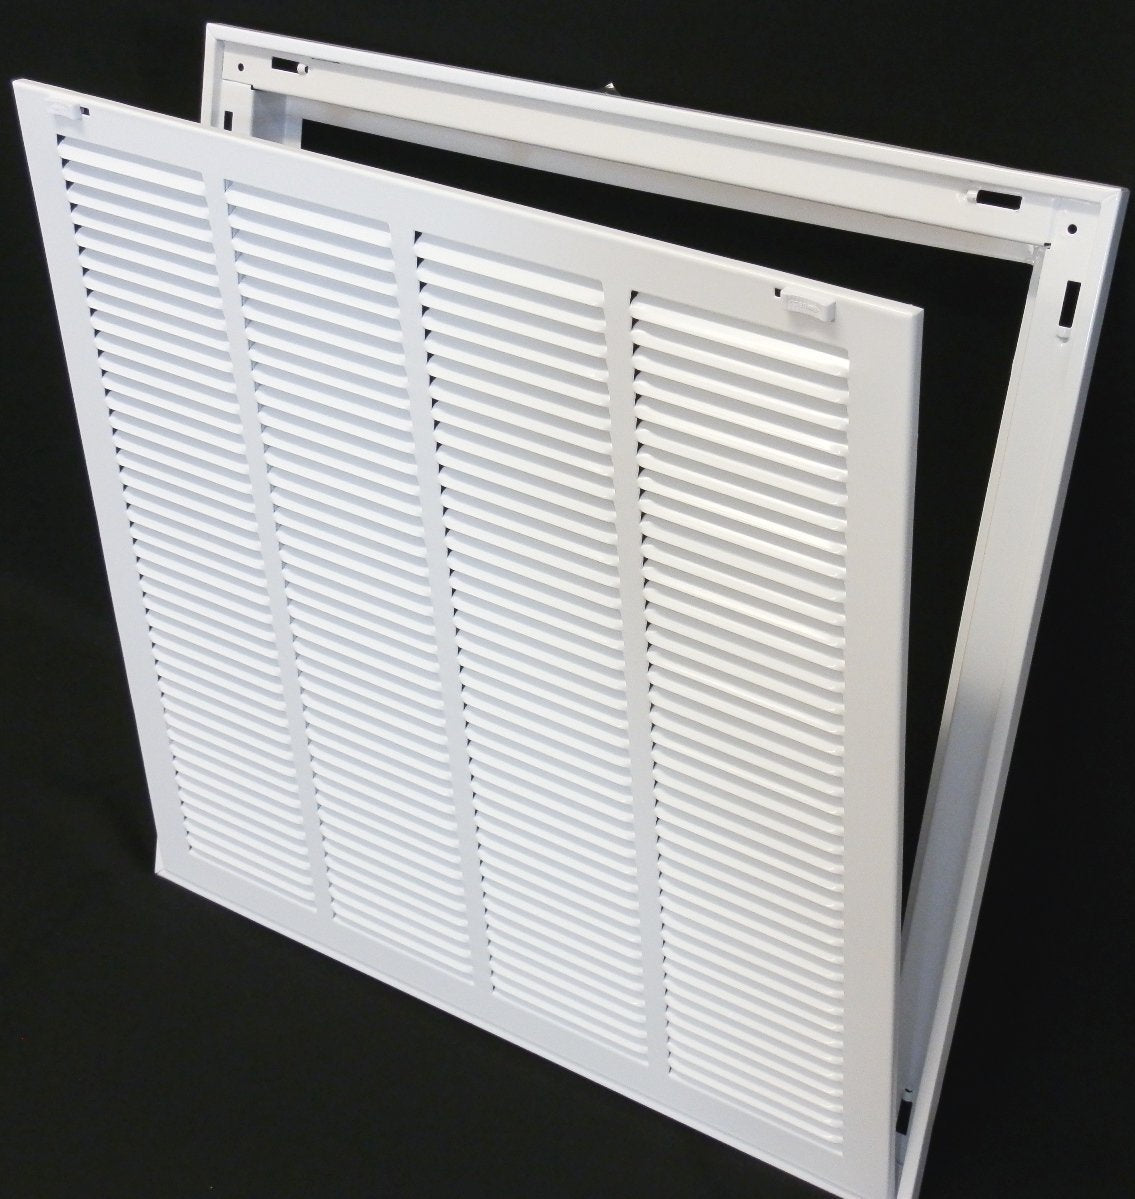 10&quot; X 36&quot; Steel Return Air Filter Grille for 1&quot; Filter - Removable Frame - [Outer Dimensions: 12 5/8&quot; X 38 5/8&quot;]